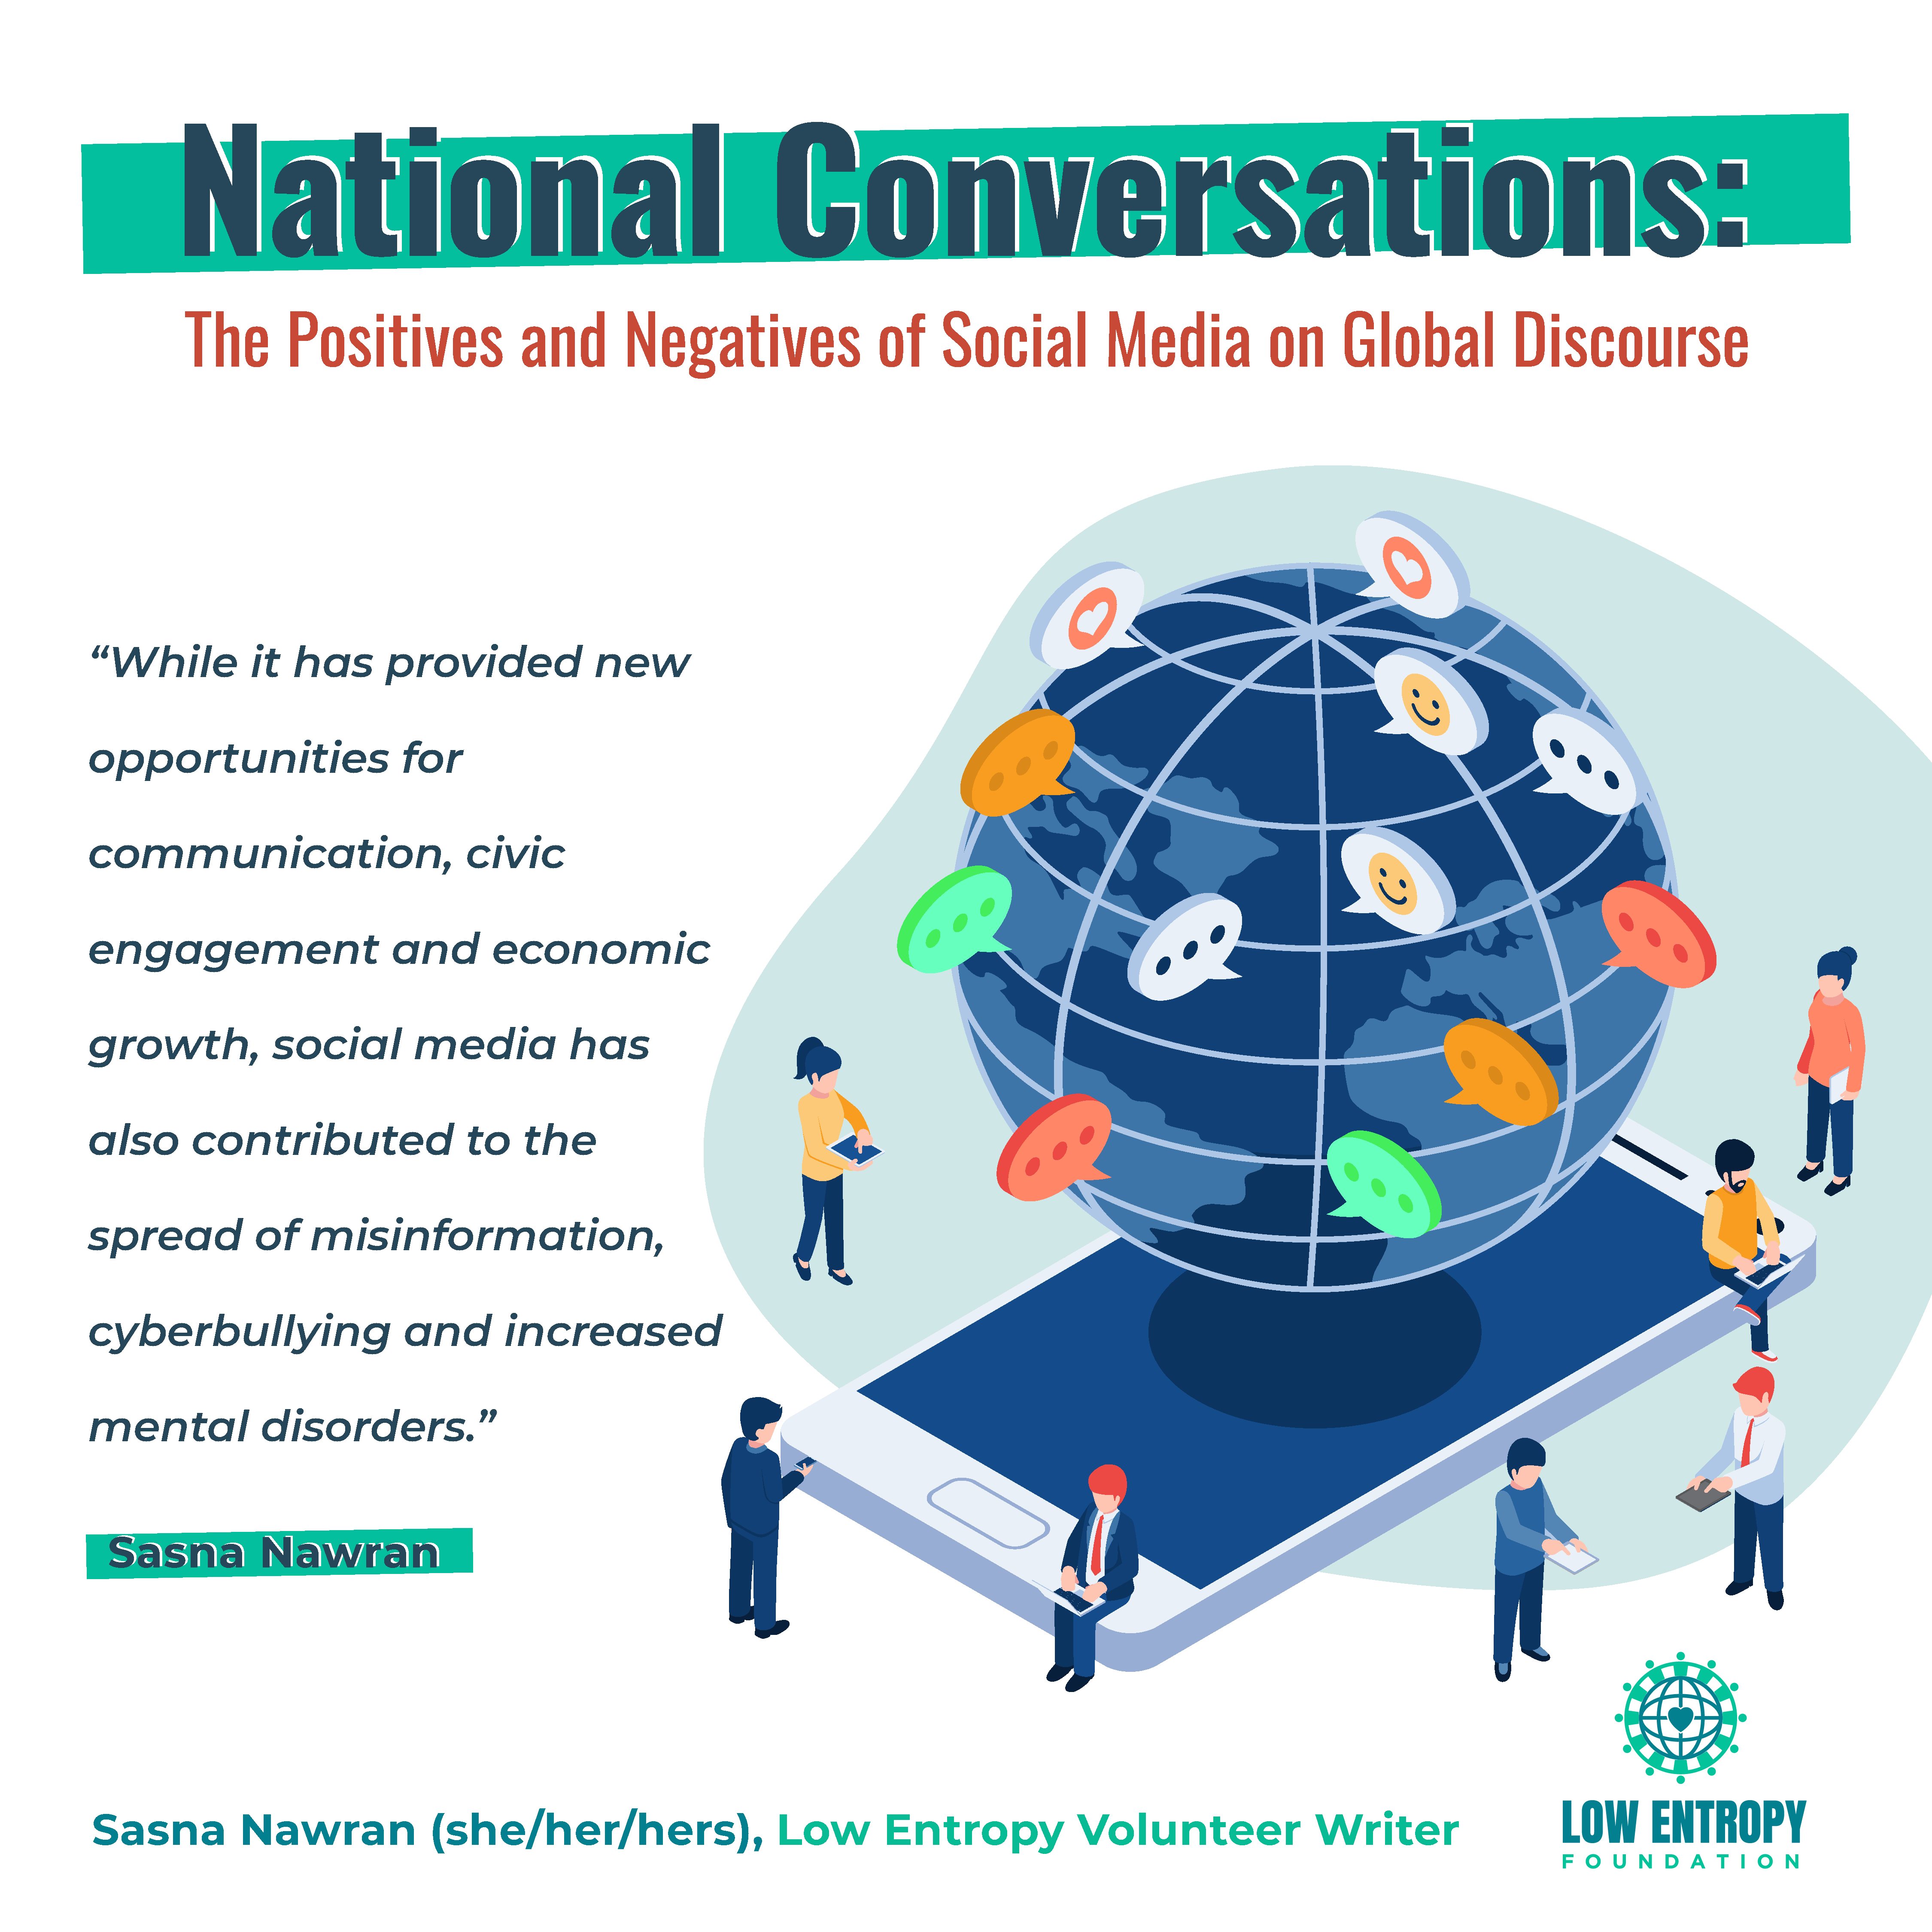 National Conversations: The Positives and Negatives of Social Media on Global Discourse